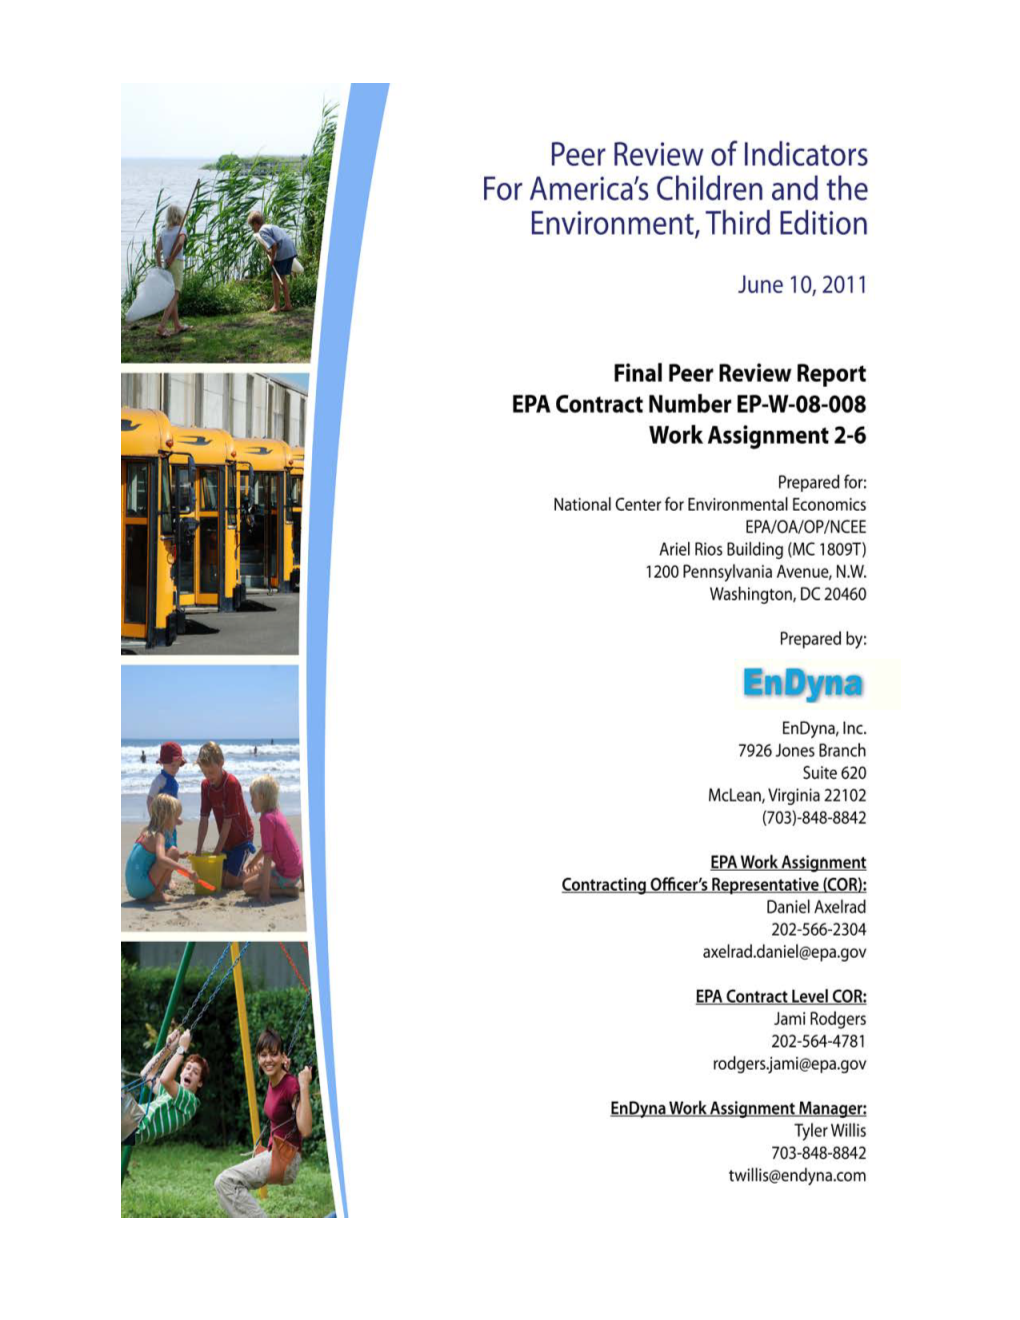 Peer Review of Indicators for America's Children and The